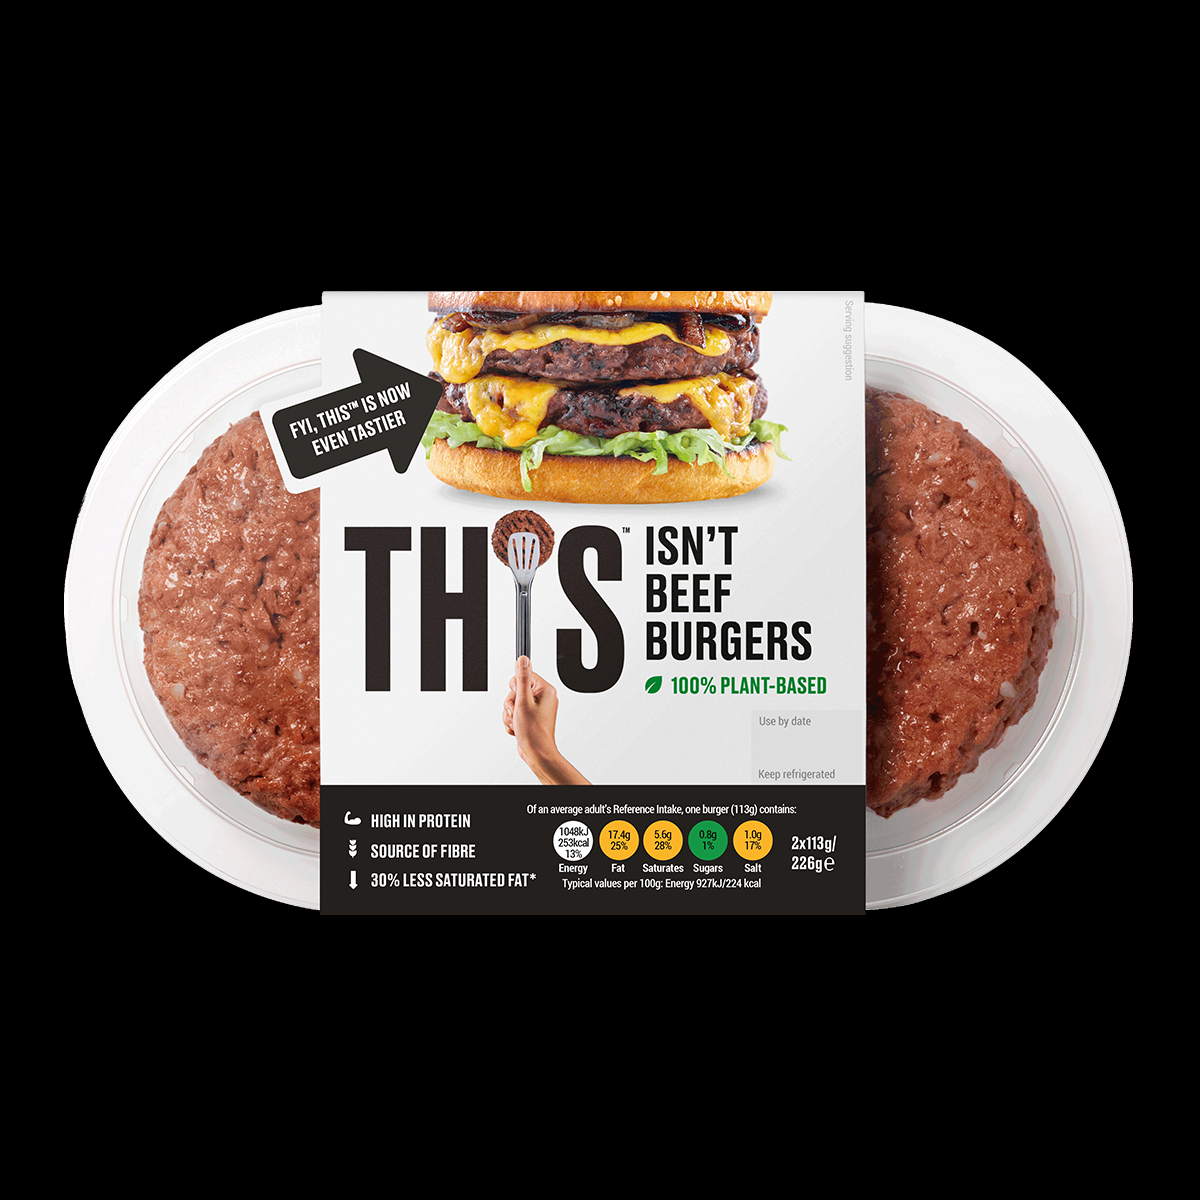 Plant-based & vegan alternative to beef burgers from THIS with nutritional information.